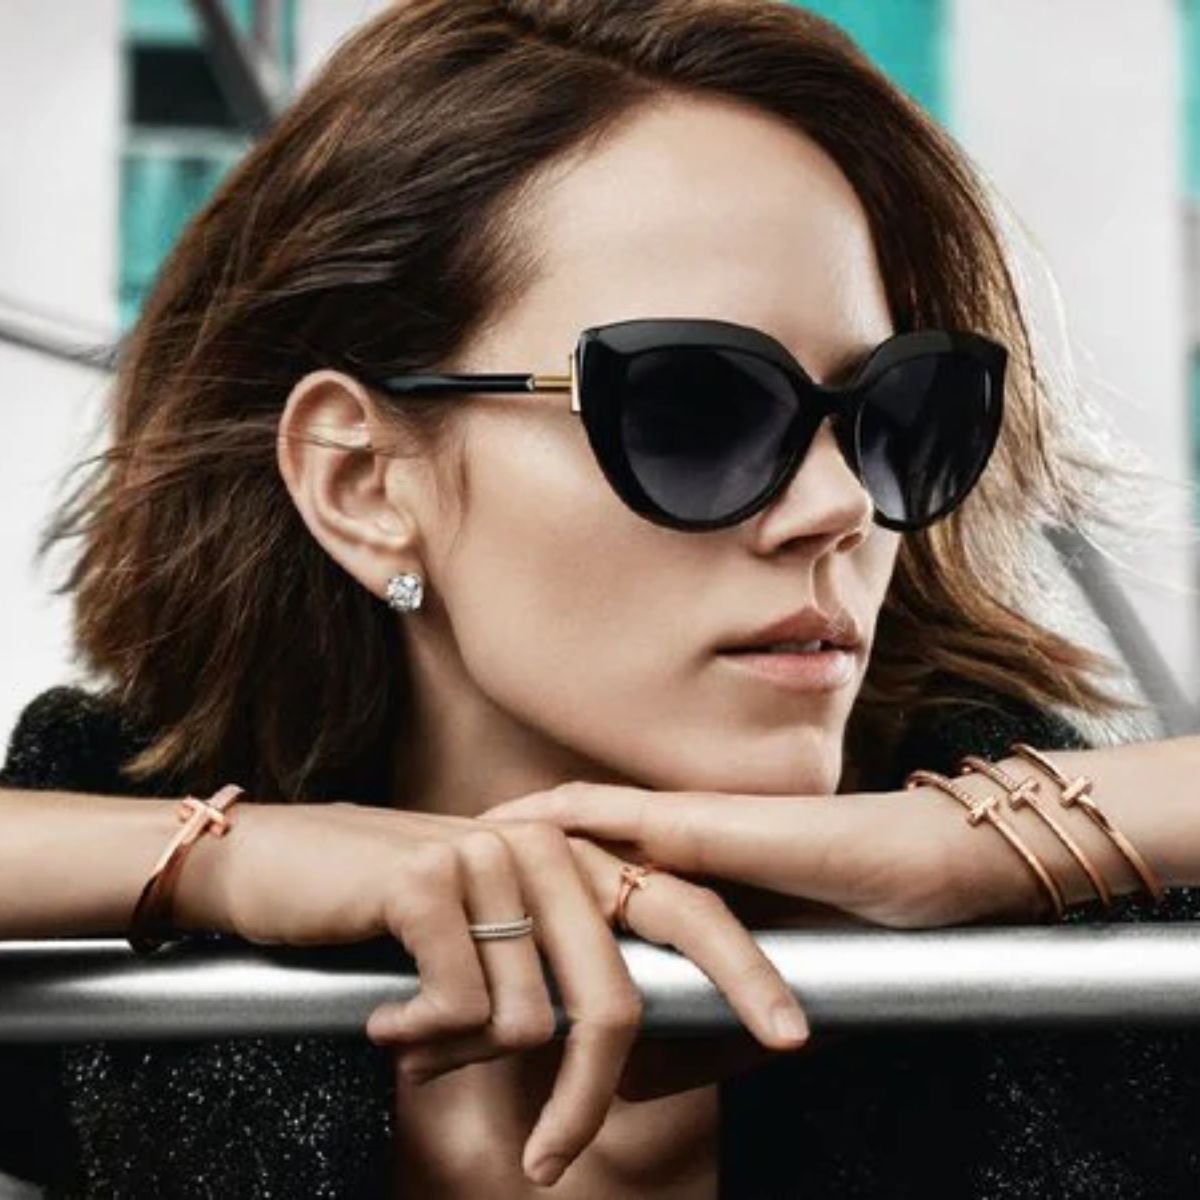 "Shop Premium Collection Of Tiffany & Co Sunglasses For Women's Available At Optorium"